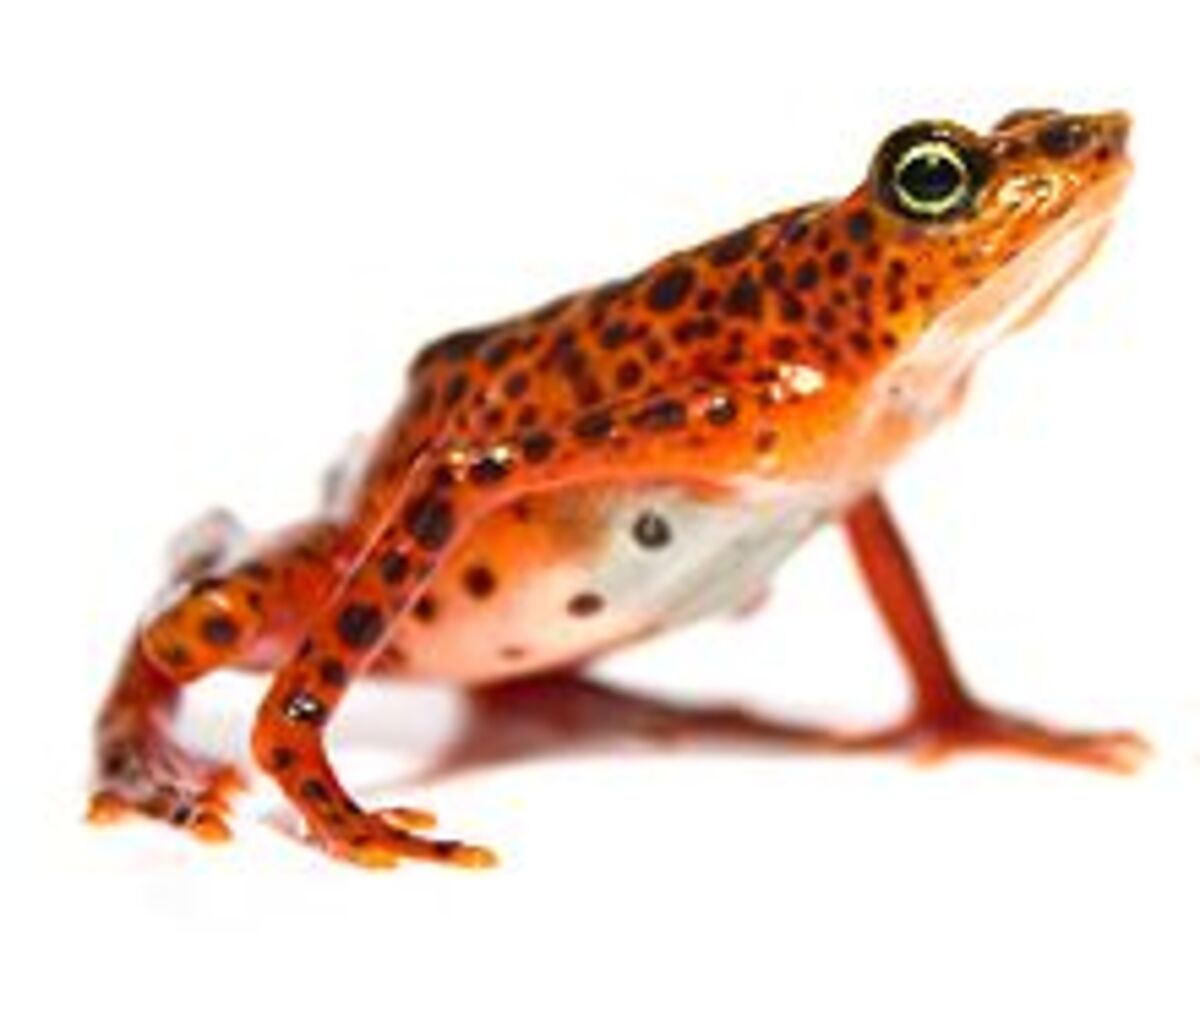 Toad mountain harlequin frog